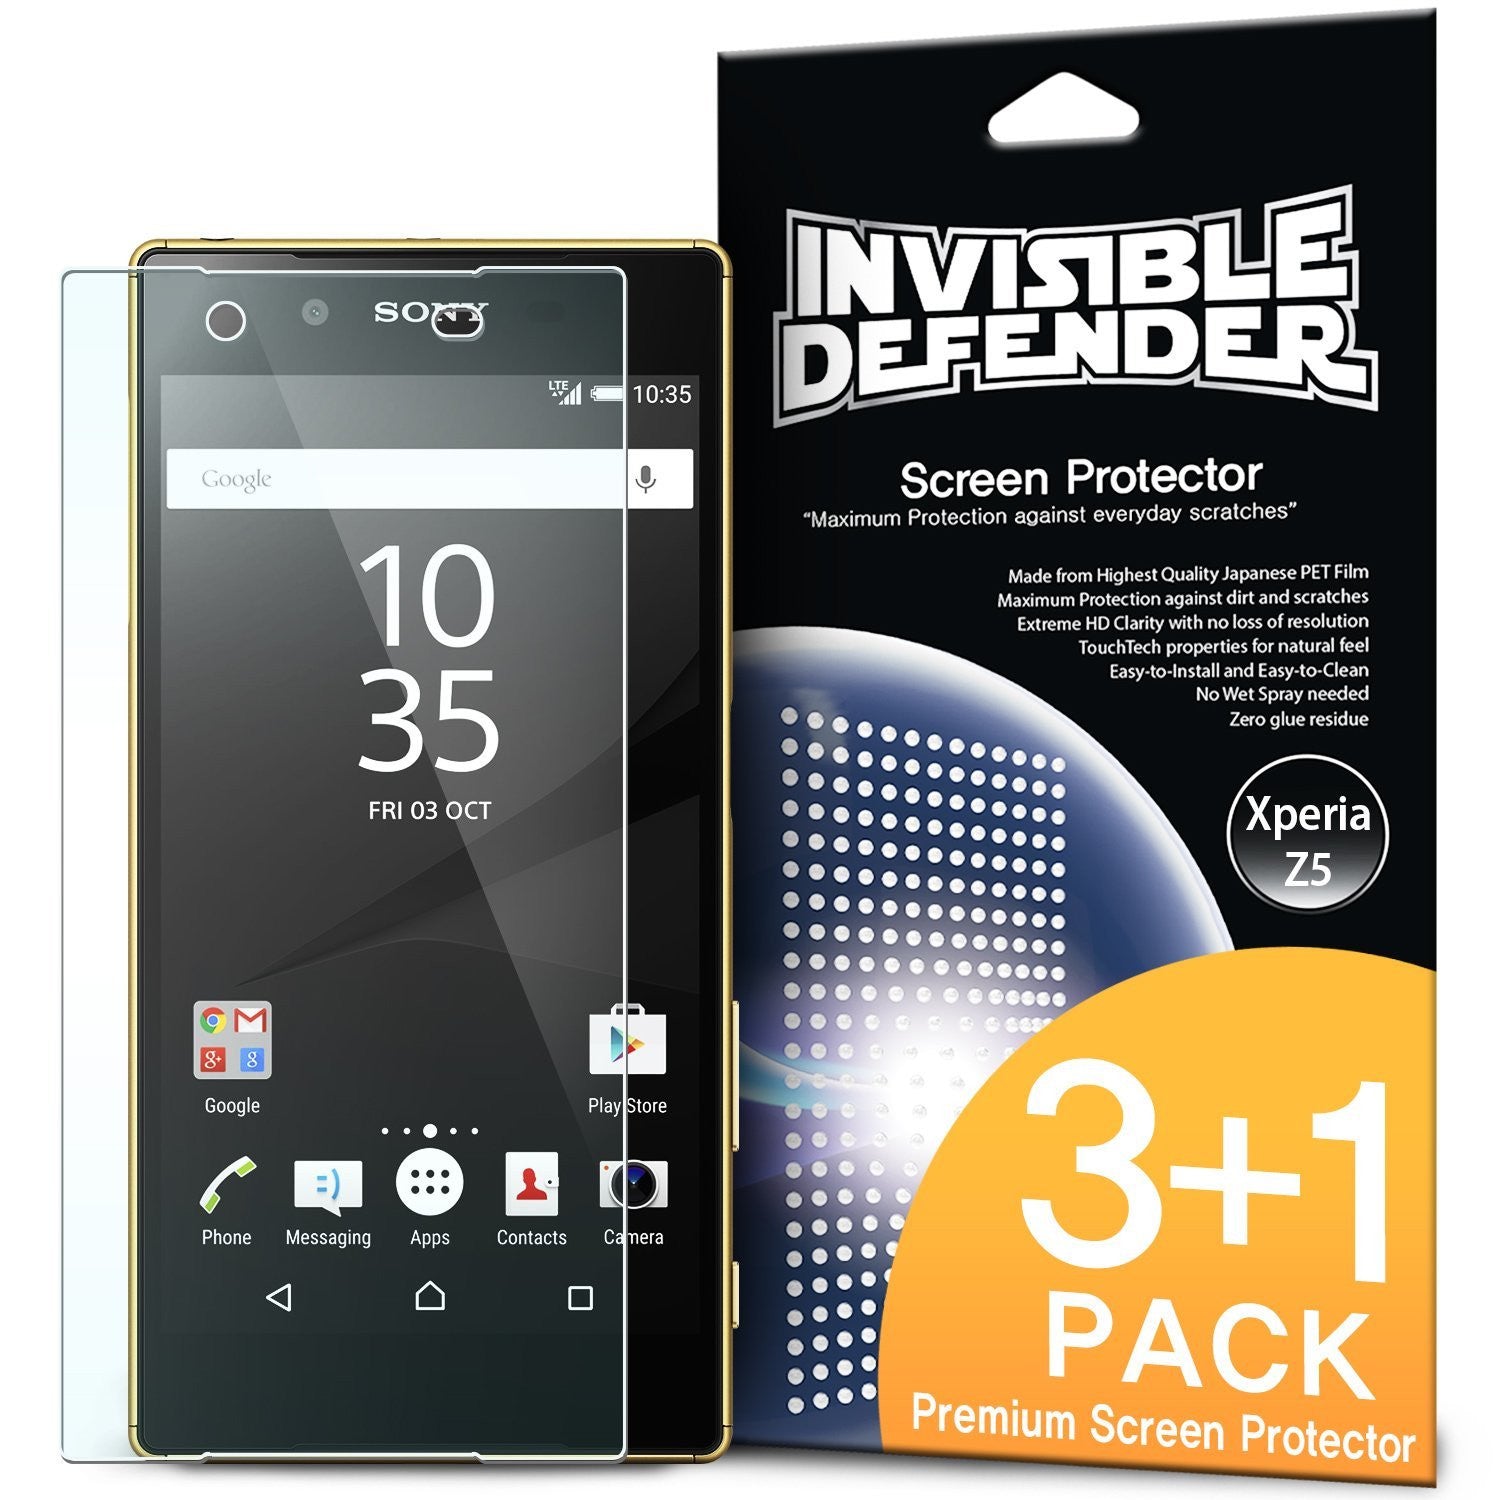 xperia z5, ringke invisible defender 3+1 pack screen protector